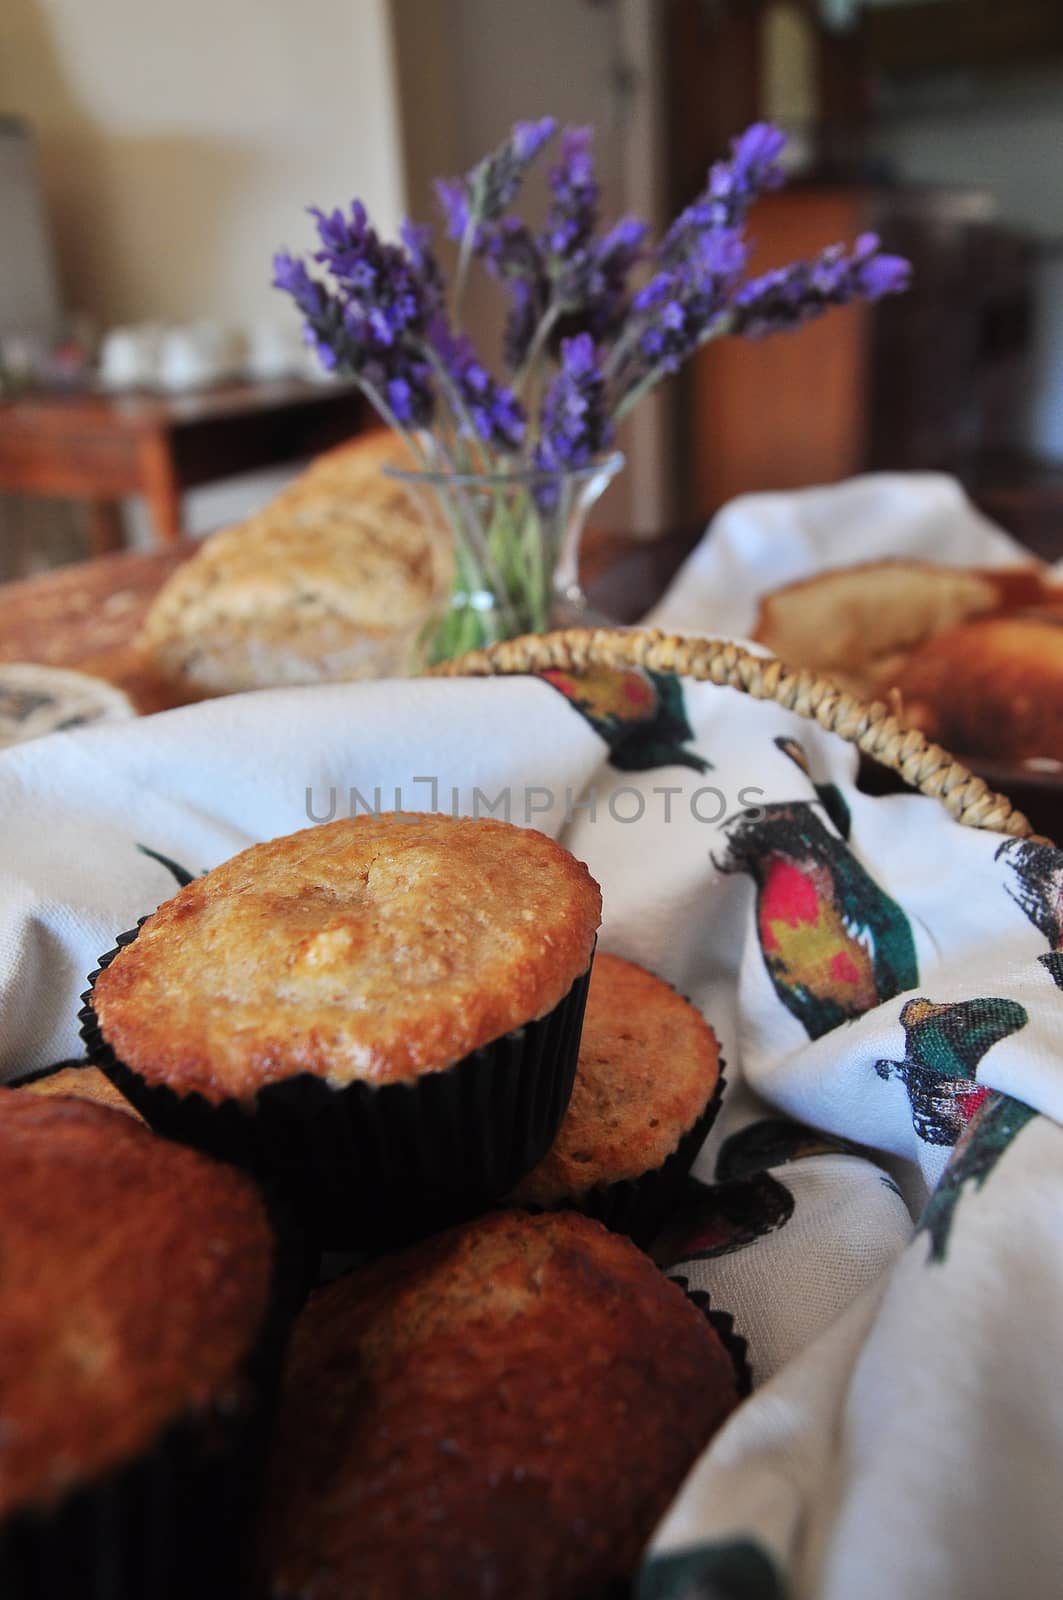 Freshly baked breakfast muffins in a basket with other home baked produce in the background.